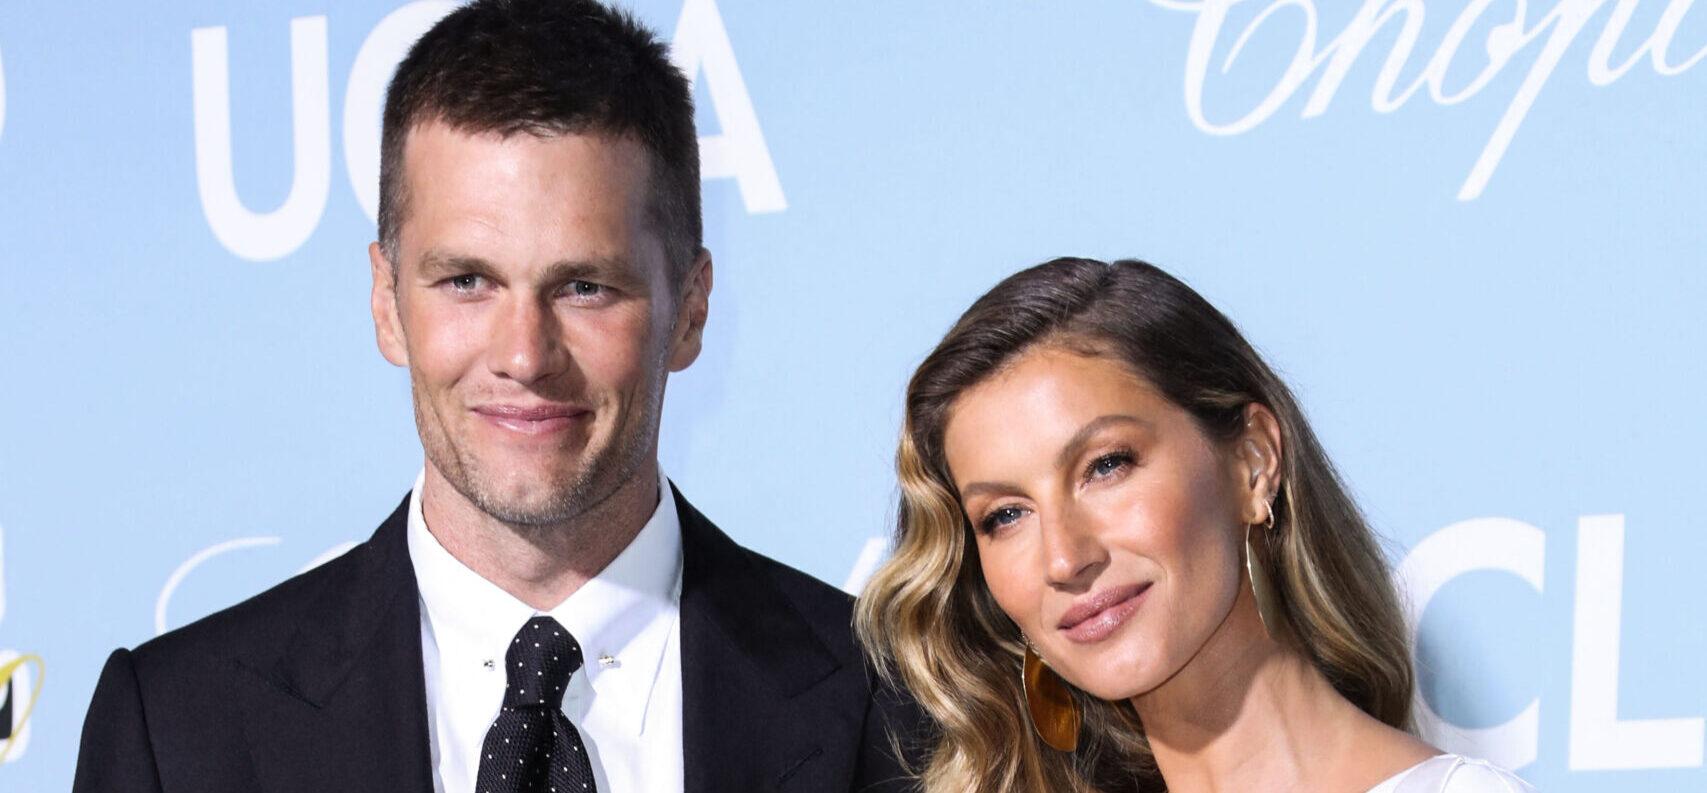 Gisele Bündchen Seemingly Claps Back At Tom Brady After ‘Cheating’ Post